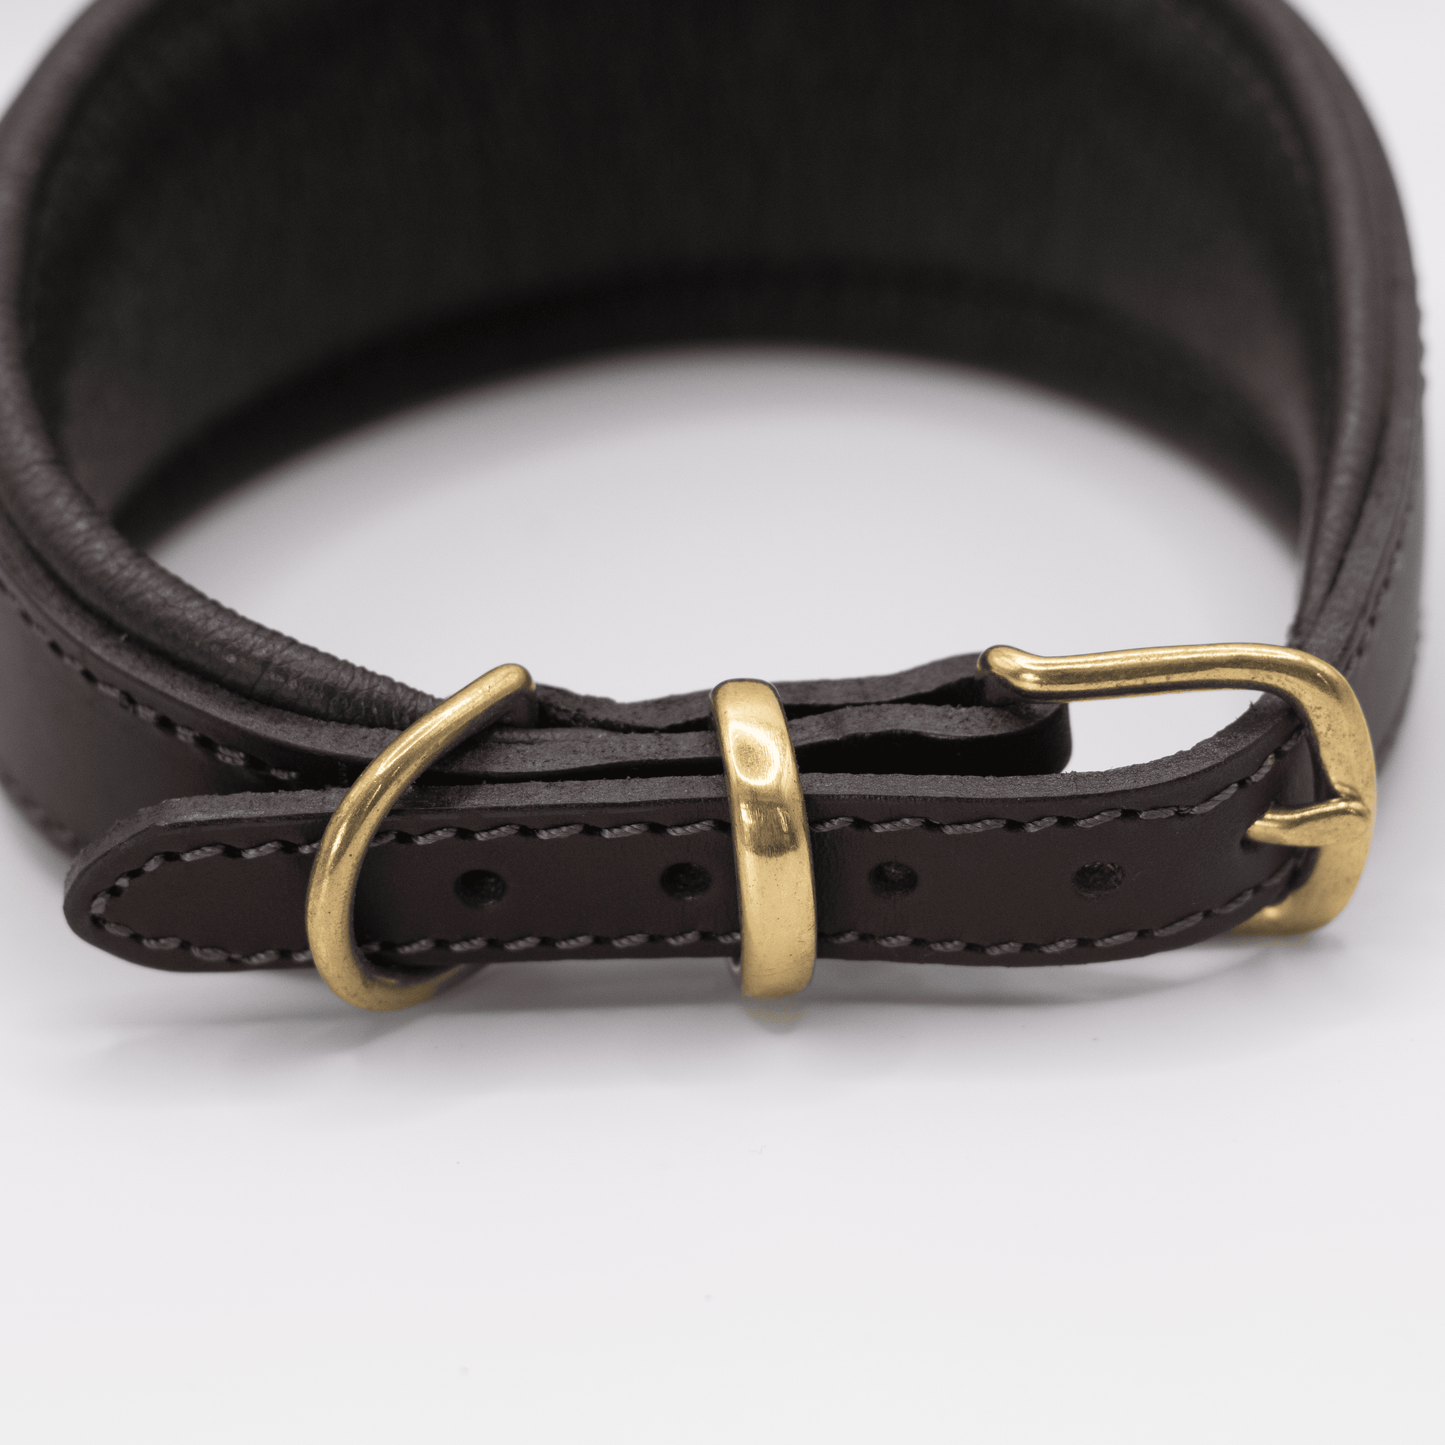 D&H Padded Leather Hound Collar Brown